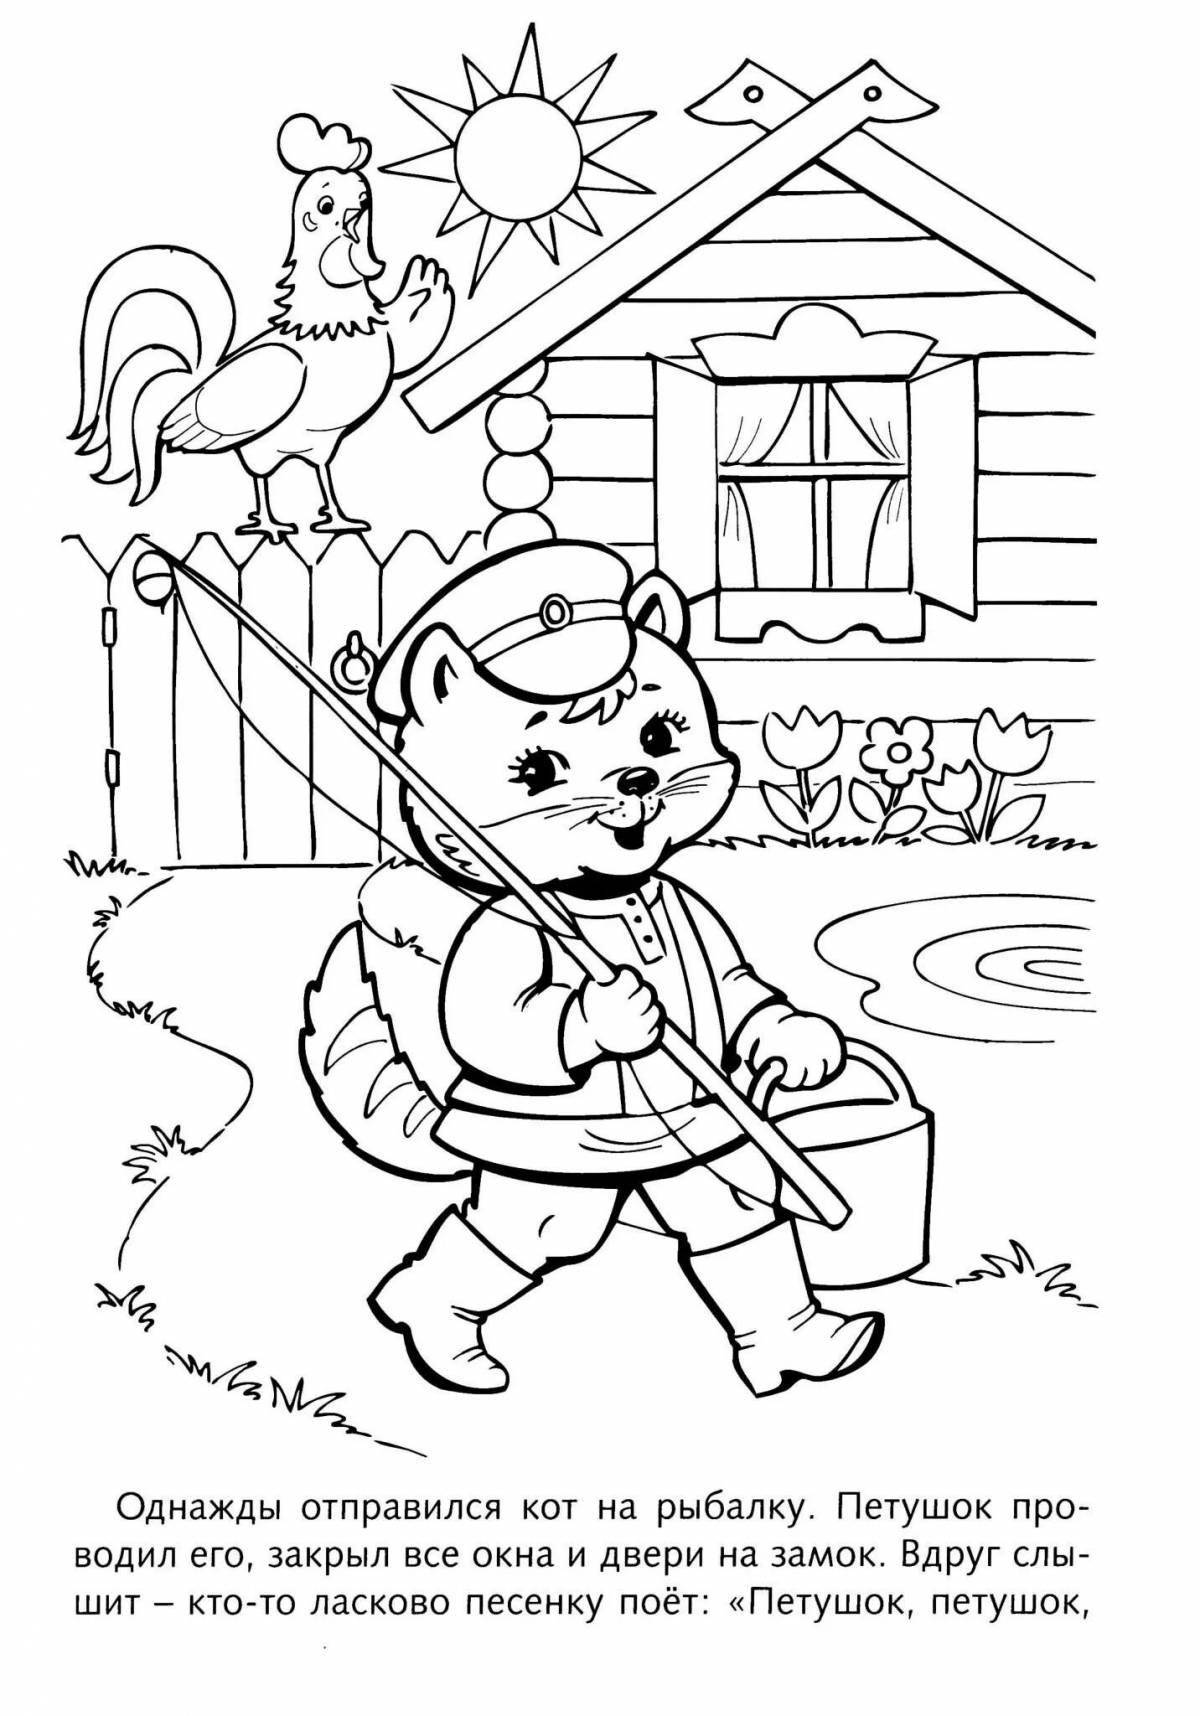 Inviting coloring fox and rooster Russian folk tale